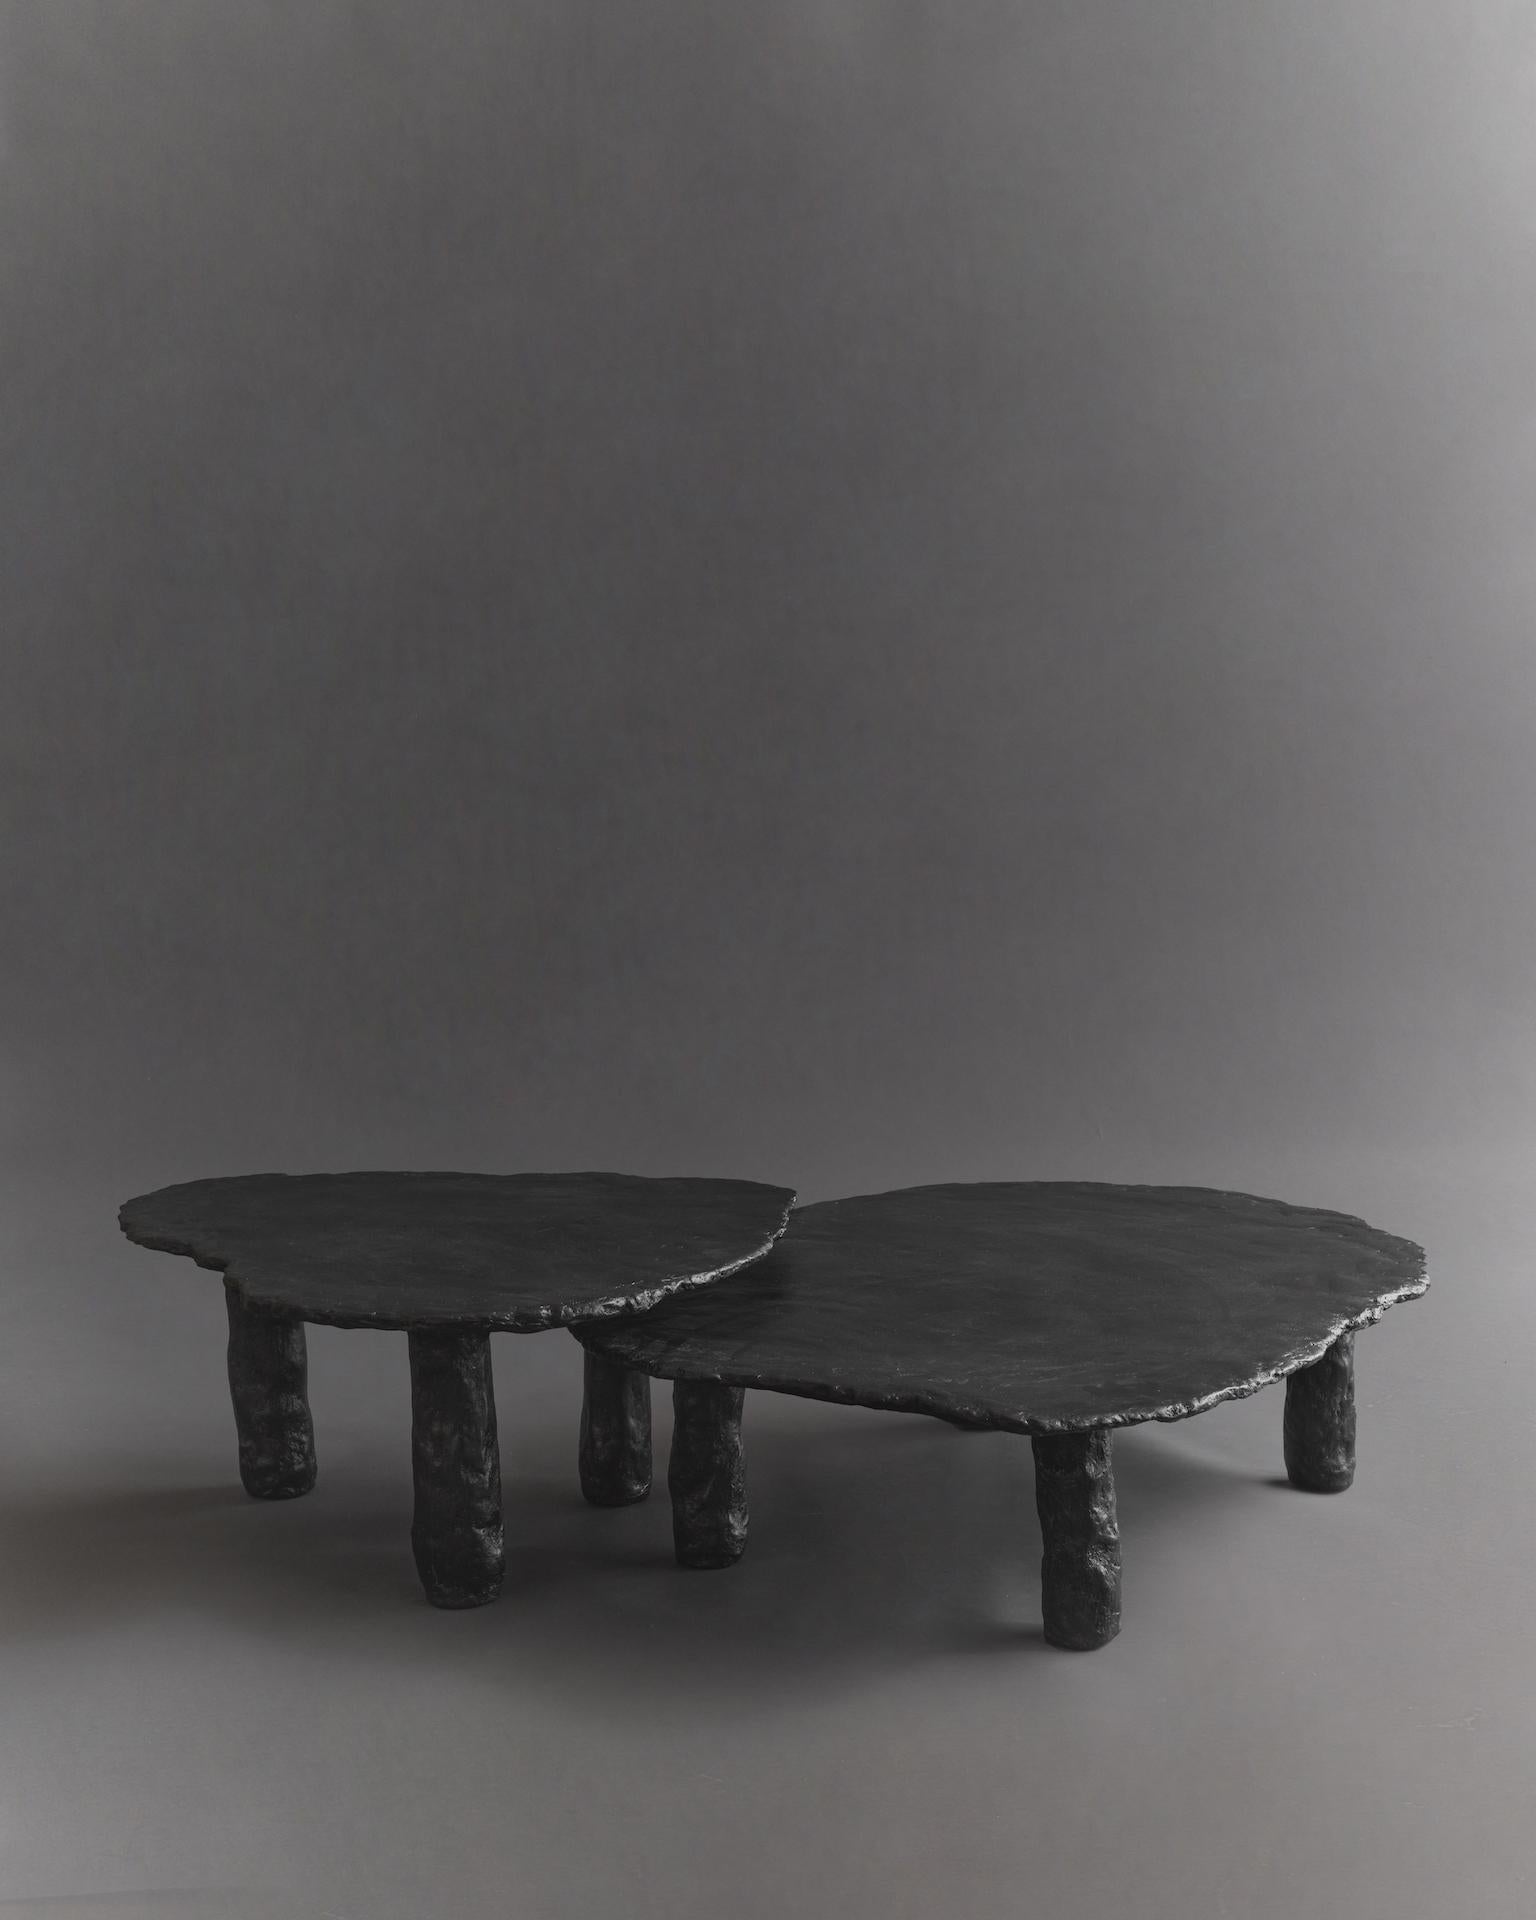 Inspired by stone slabs, this table embodies texture, organic shapes, and close attention to detail. Each product is handmade to order, resulting in slight variations to the one pictured. This makes each piece one of a kind. The tables are finished